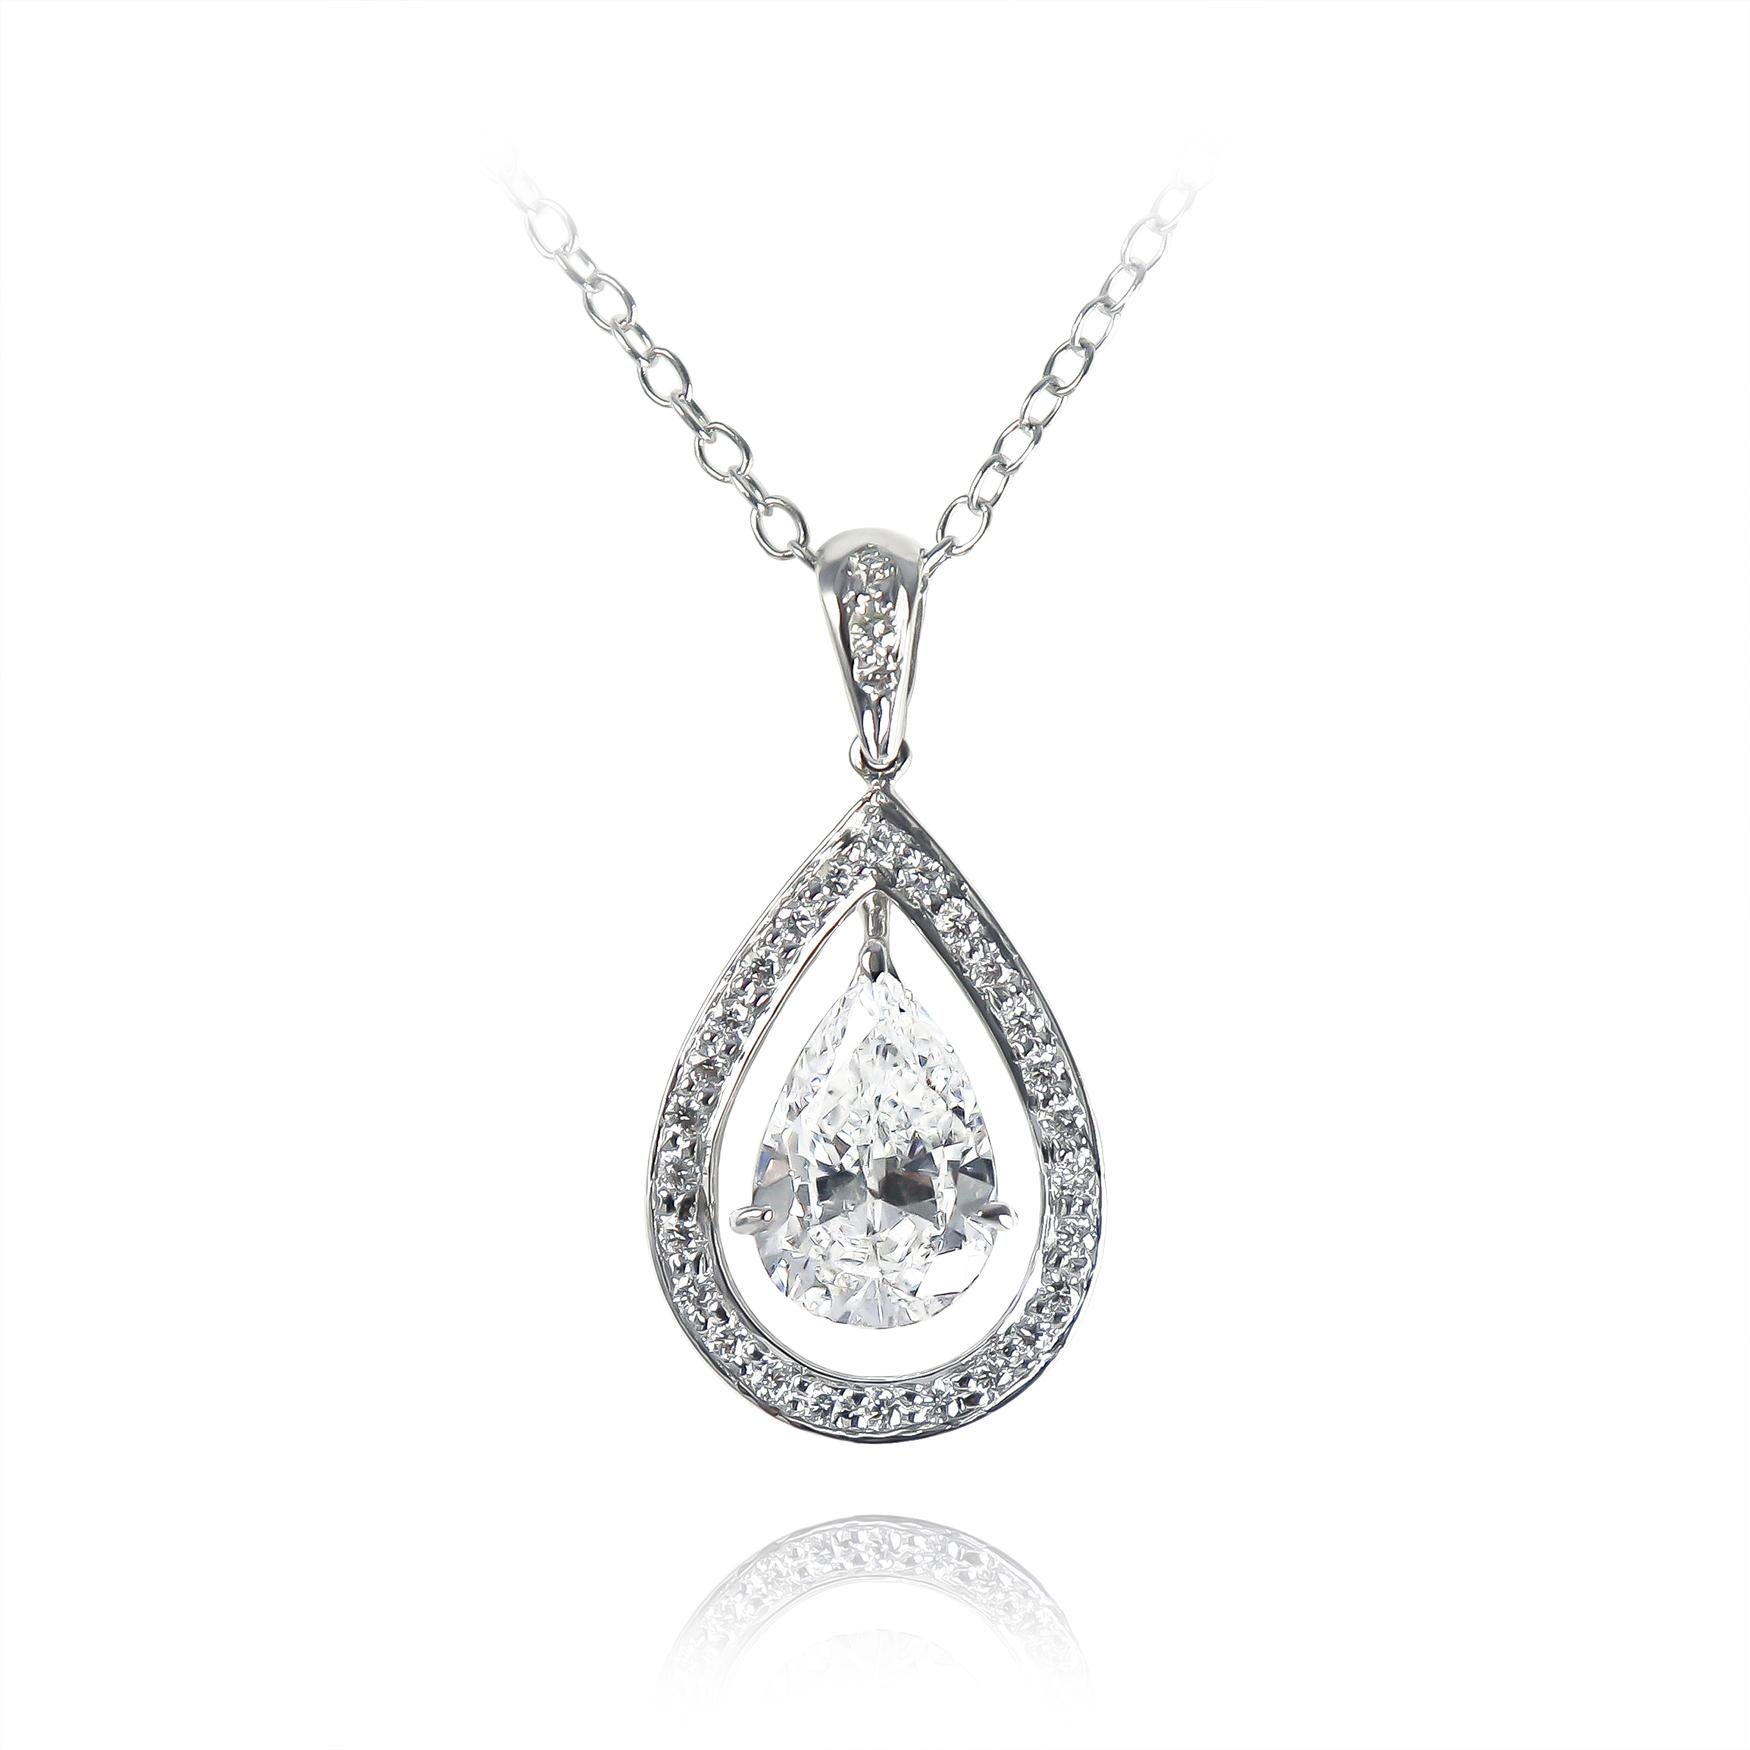 This charming and scintillating piece from the J. Birnbach workshop features a GIA certified 1.52 carat pear shape diamond of D color and I1 clarity set in a handmade, 18K white gold pavé pendant = 0.18 carat total weight. One of the most pleasant